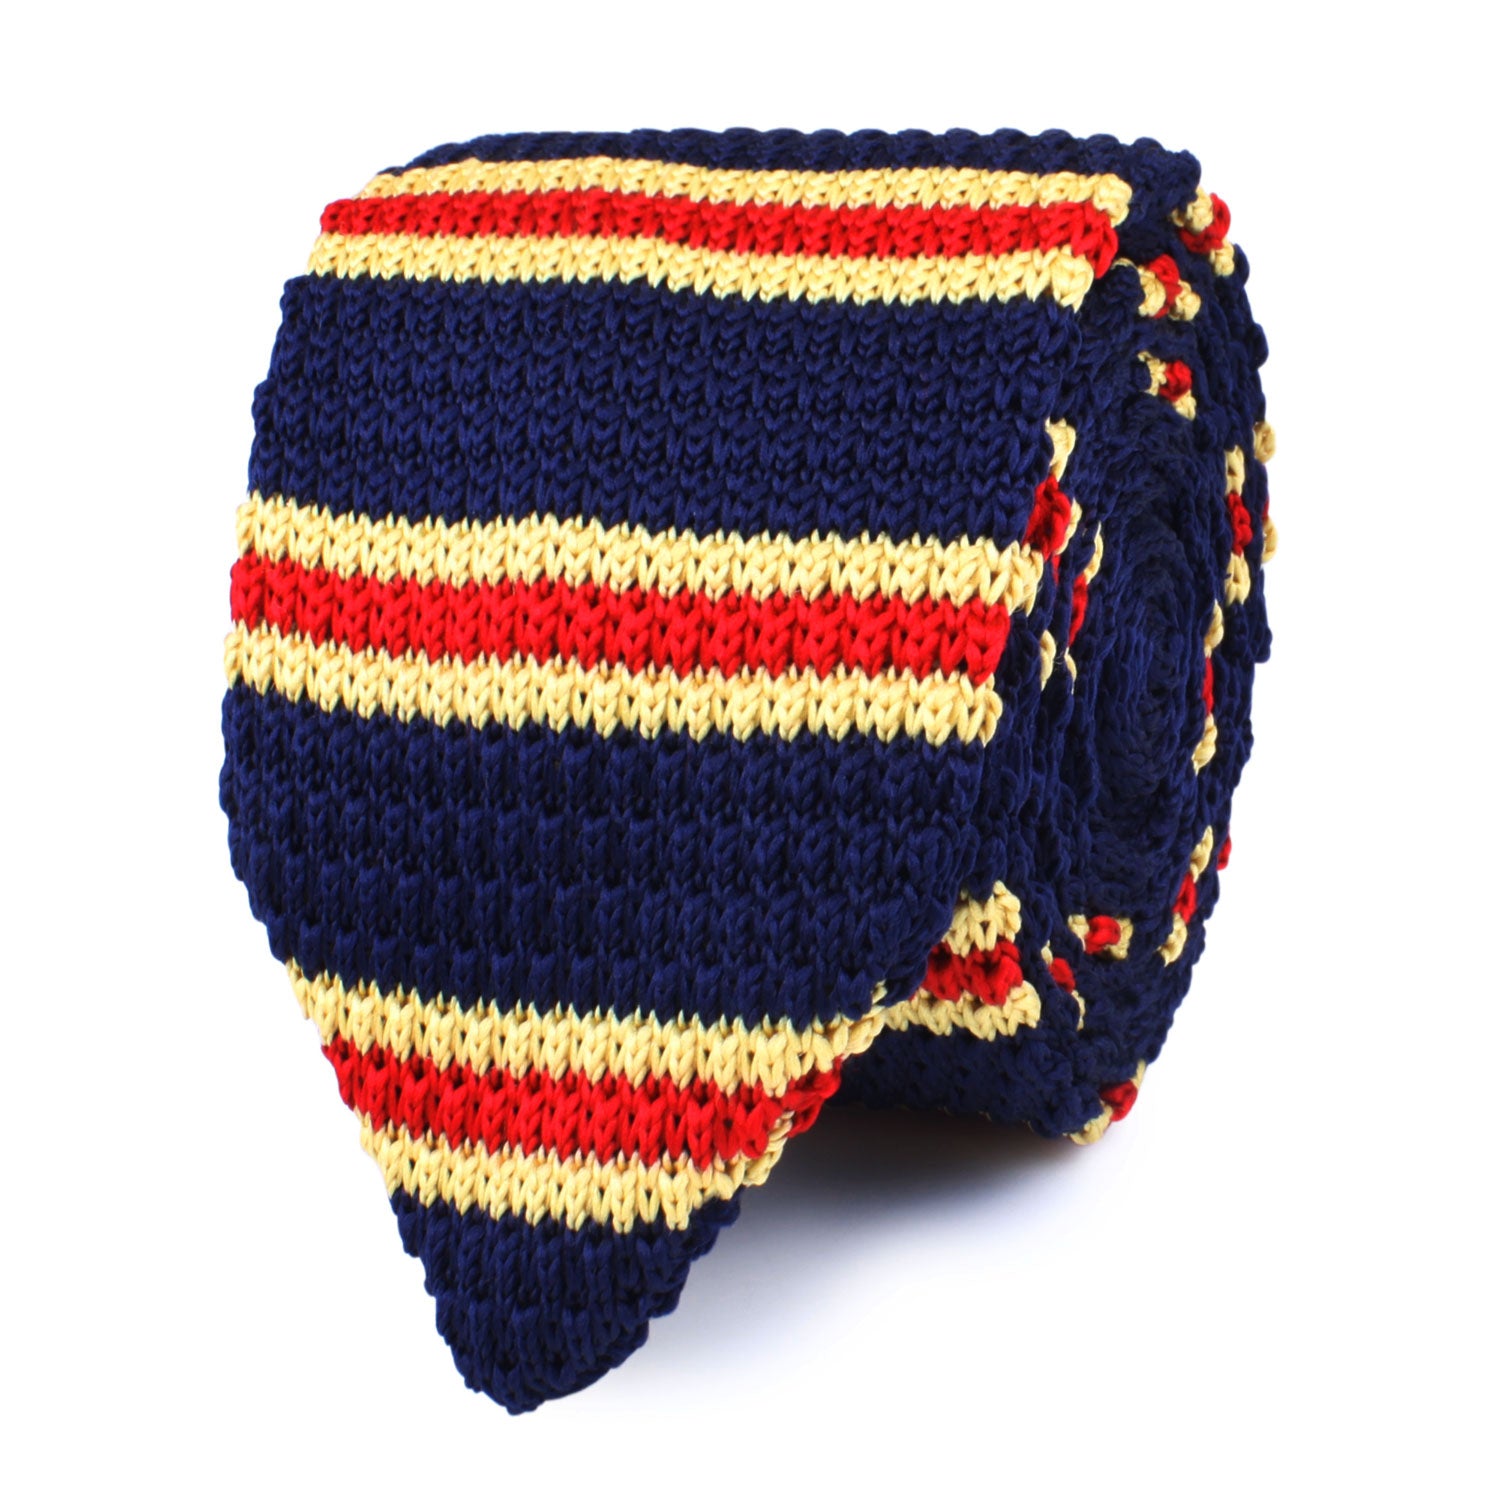 The Moroccan Knitted Tie